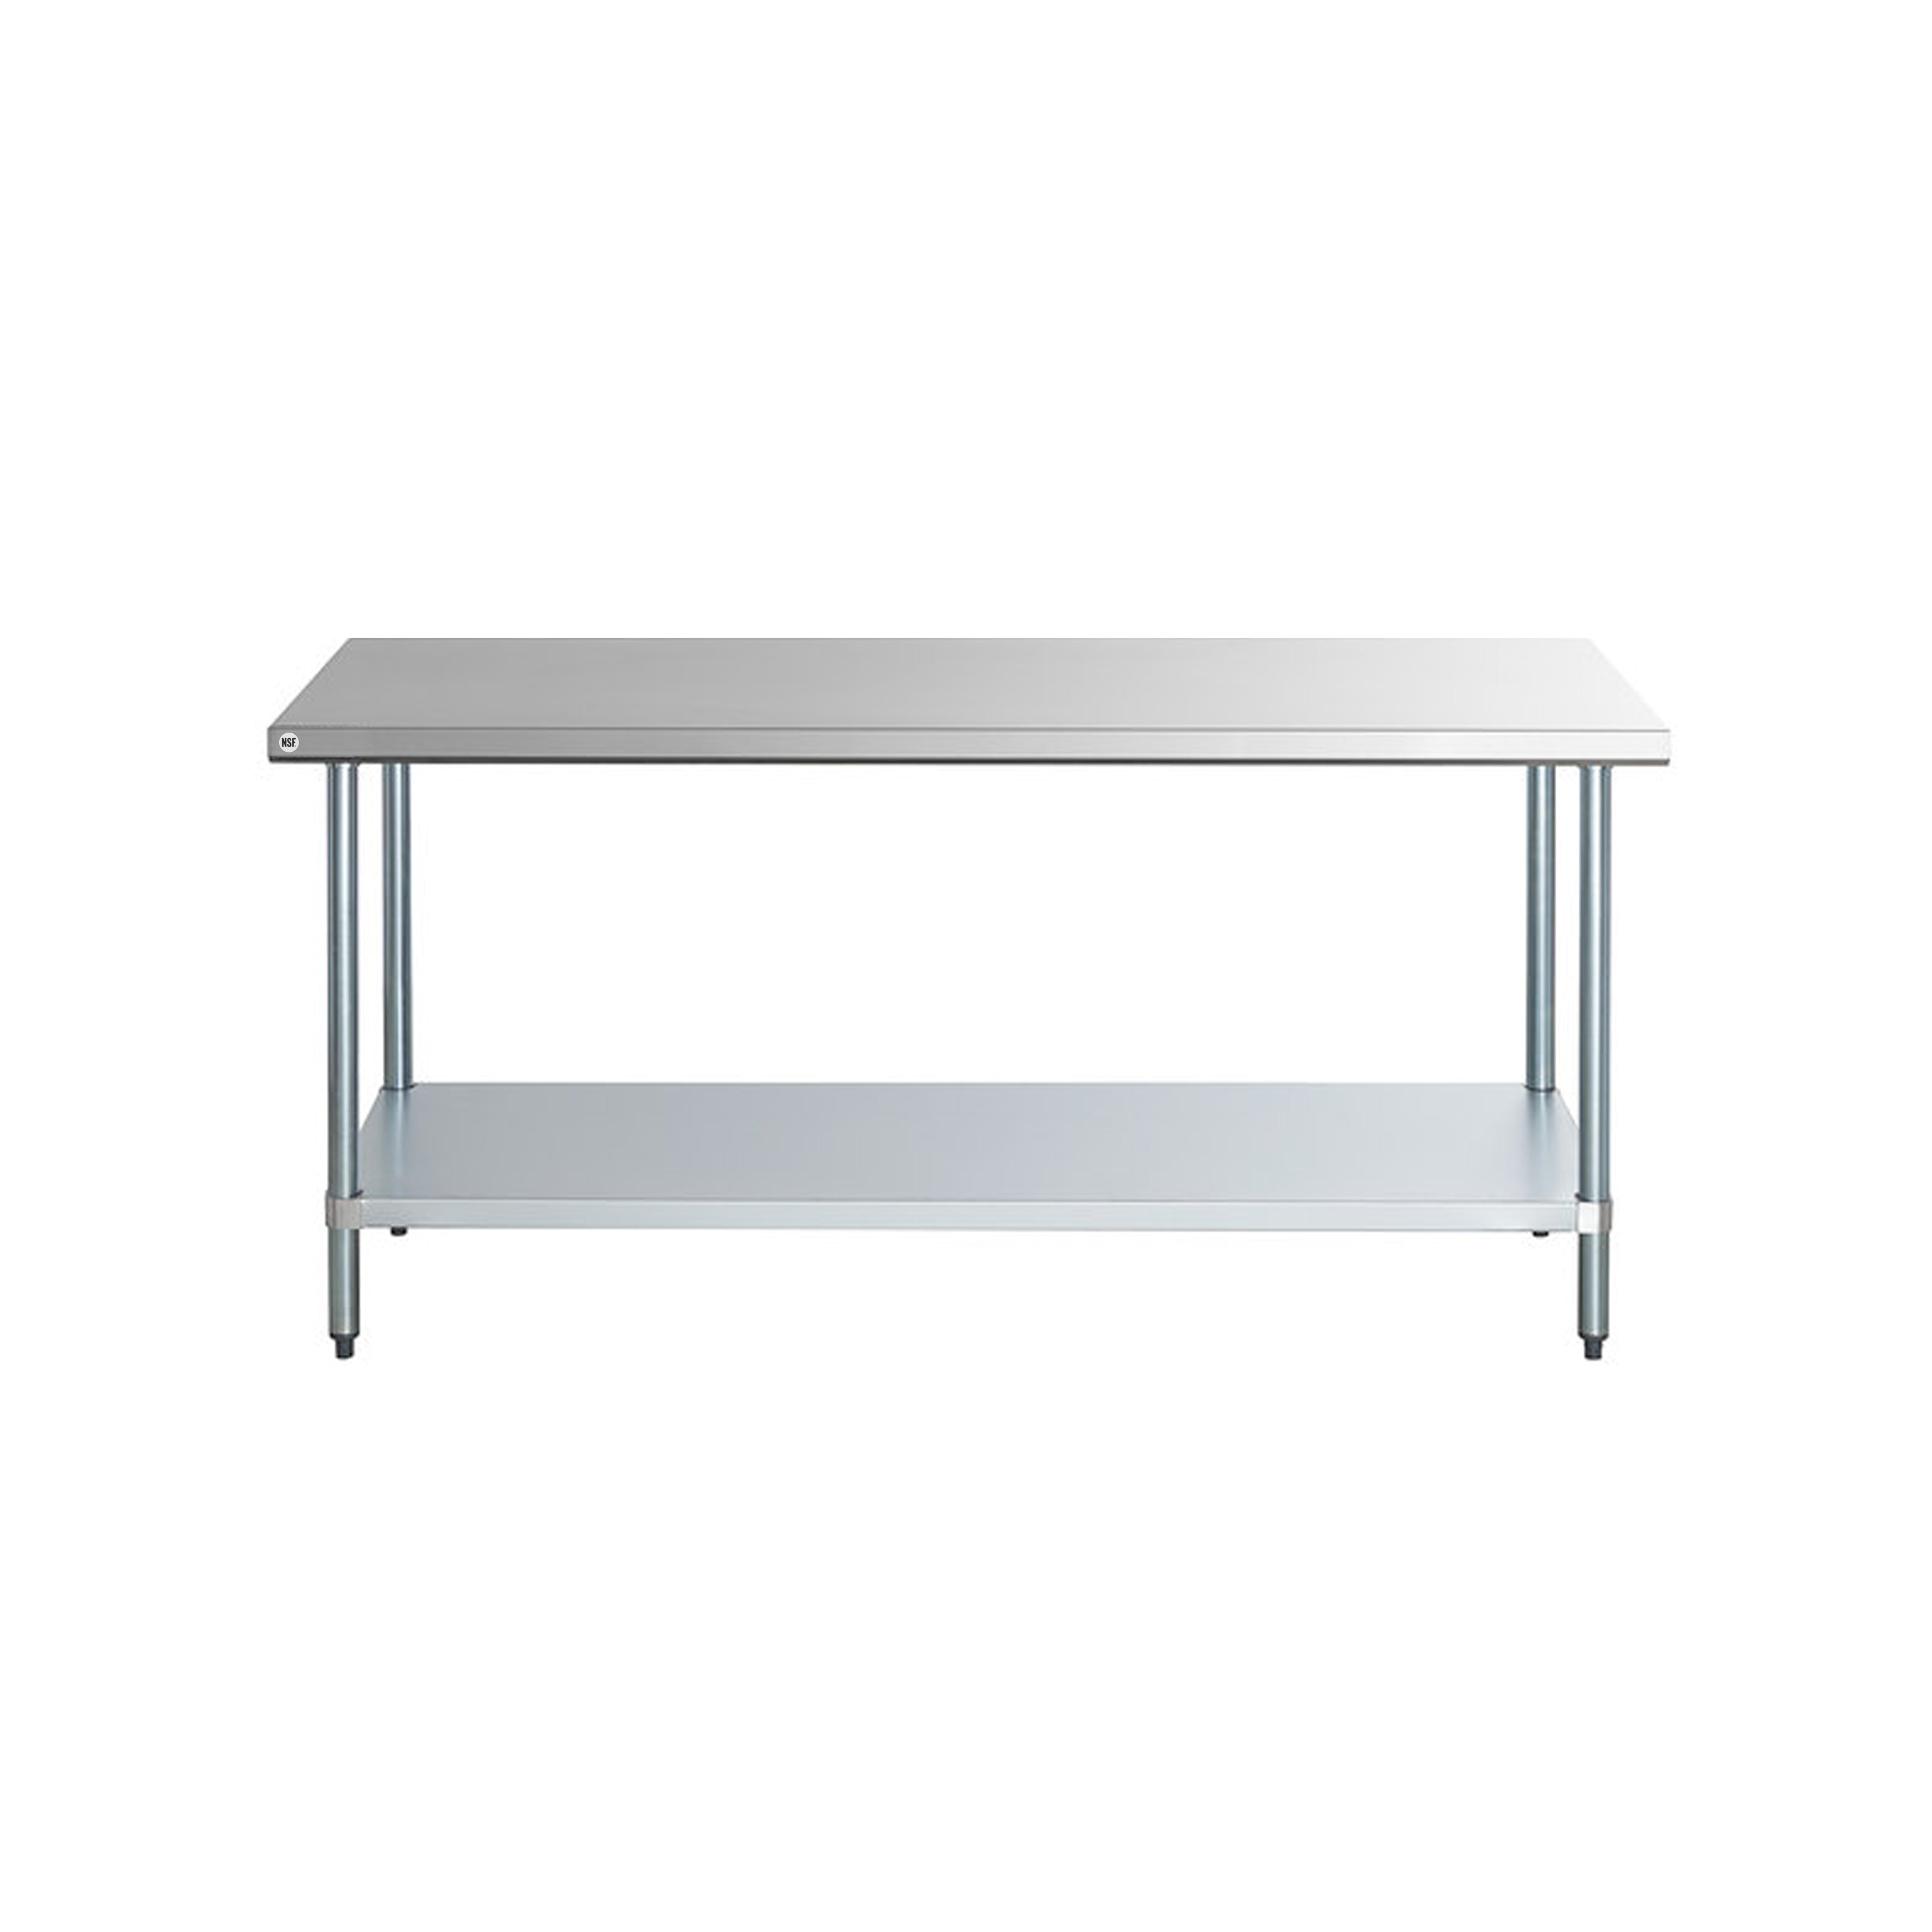 Omcan - 22066, Commercial 24" x 48" Stainless Steel Kitchen Work Table 1000lbs Light Duty